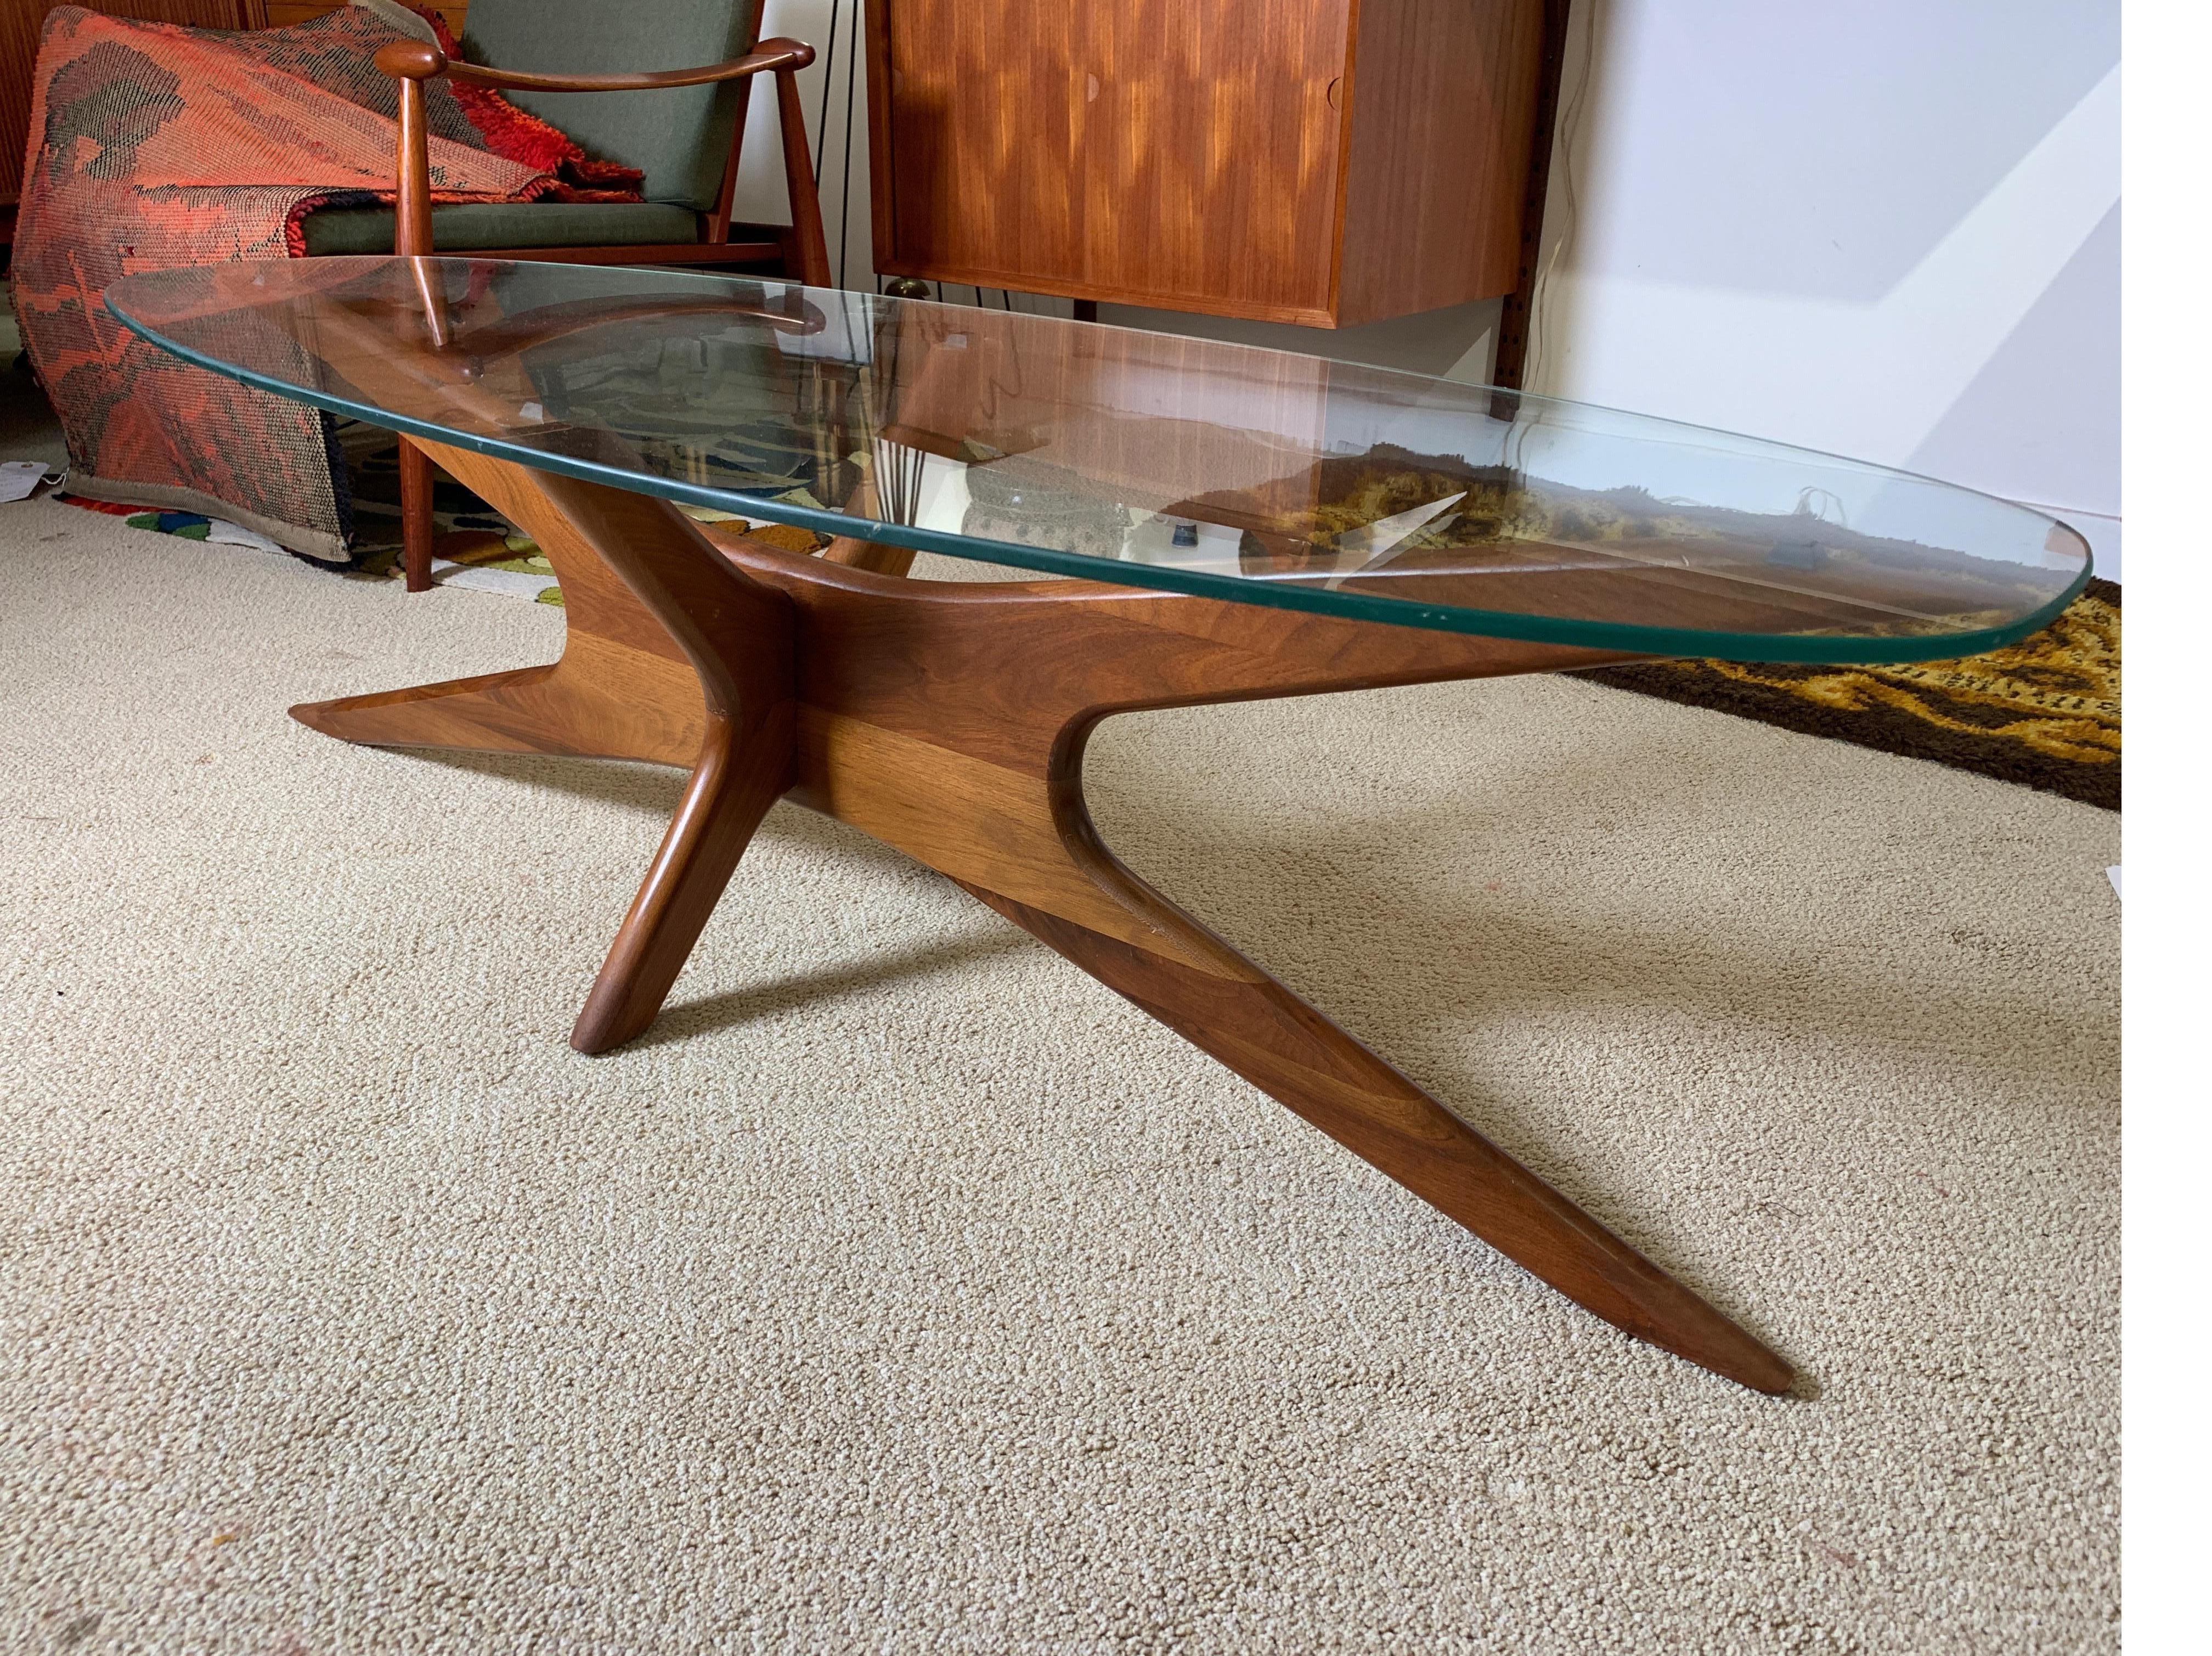 With a striking profile, this biomorphic coffee table in walnut is sure to set off any modern decor. By Adrian Pearsall for craft associates of Wilkes-Barre, PA, 1950s.